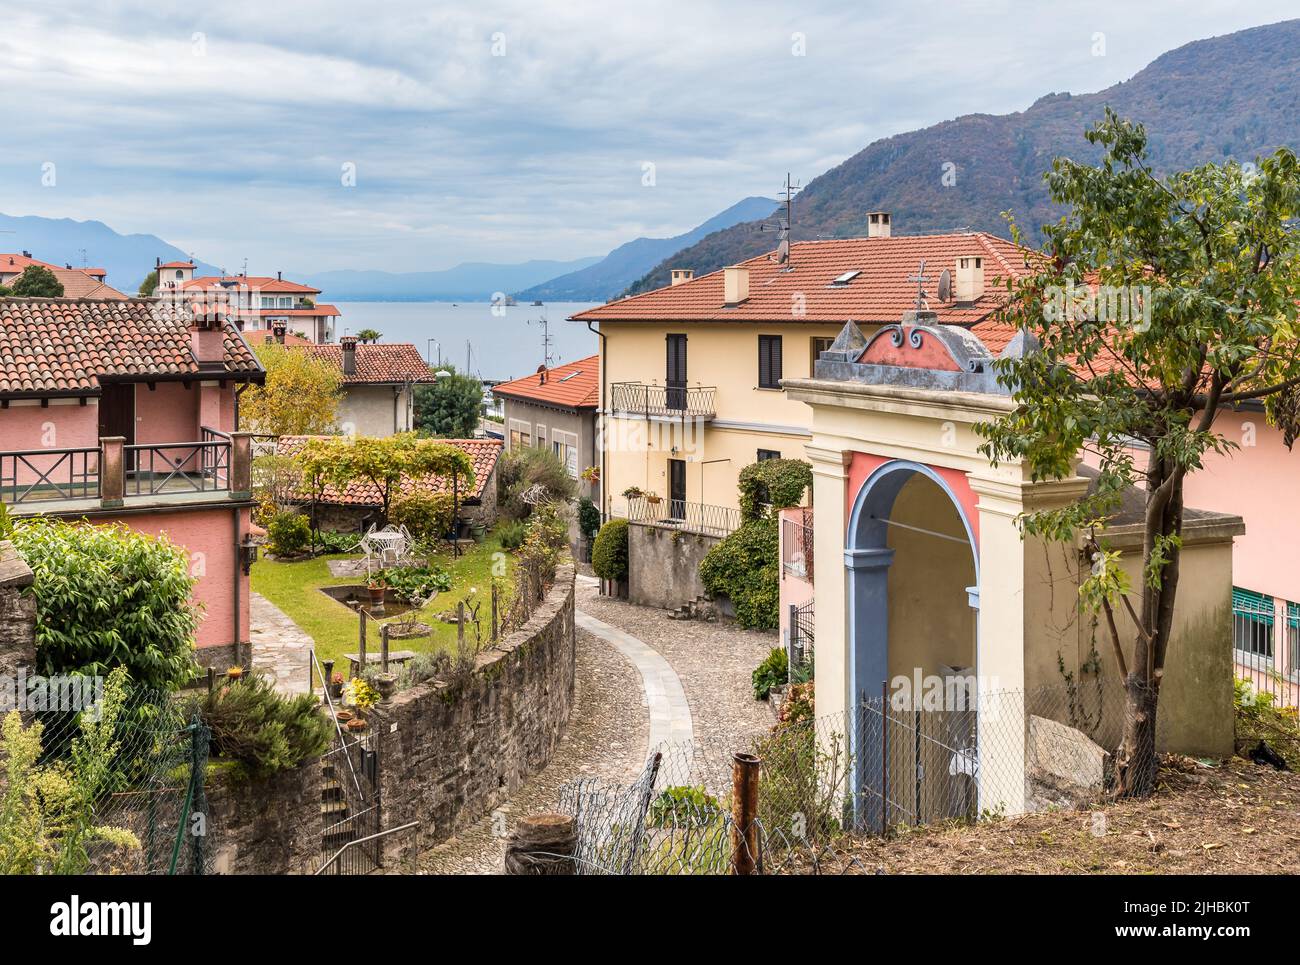 Historic center of Maccagno Inferiore, is village situated on lake Maggiore in province of Varese, Lombardy, Italy Stock Photo